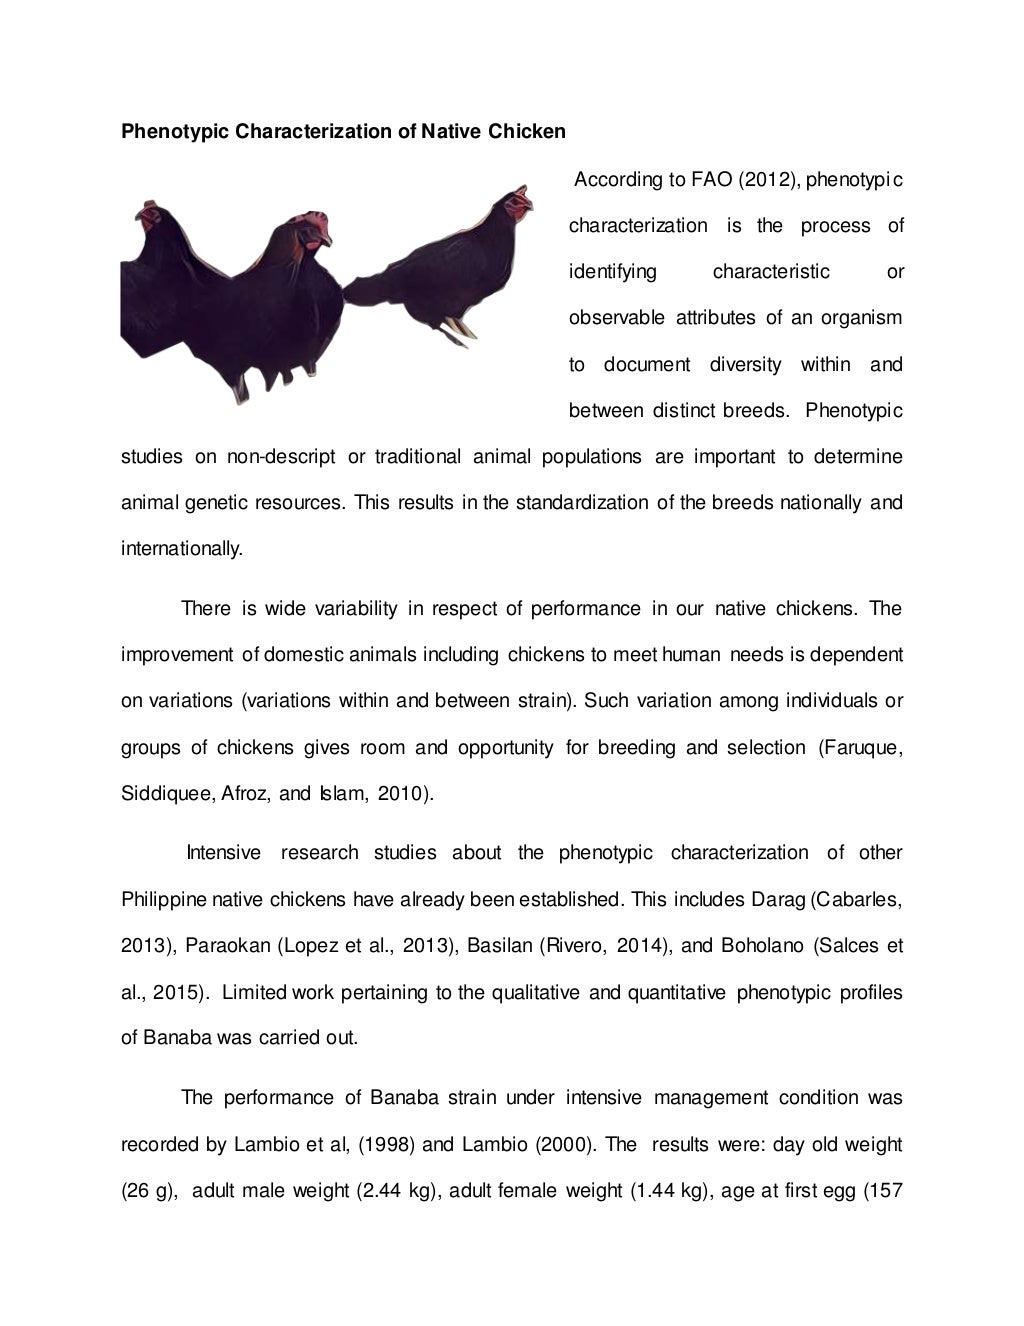 thesis title about native chicken